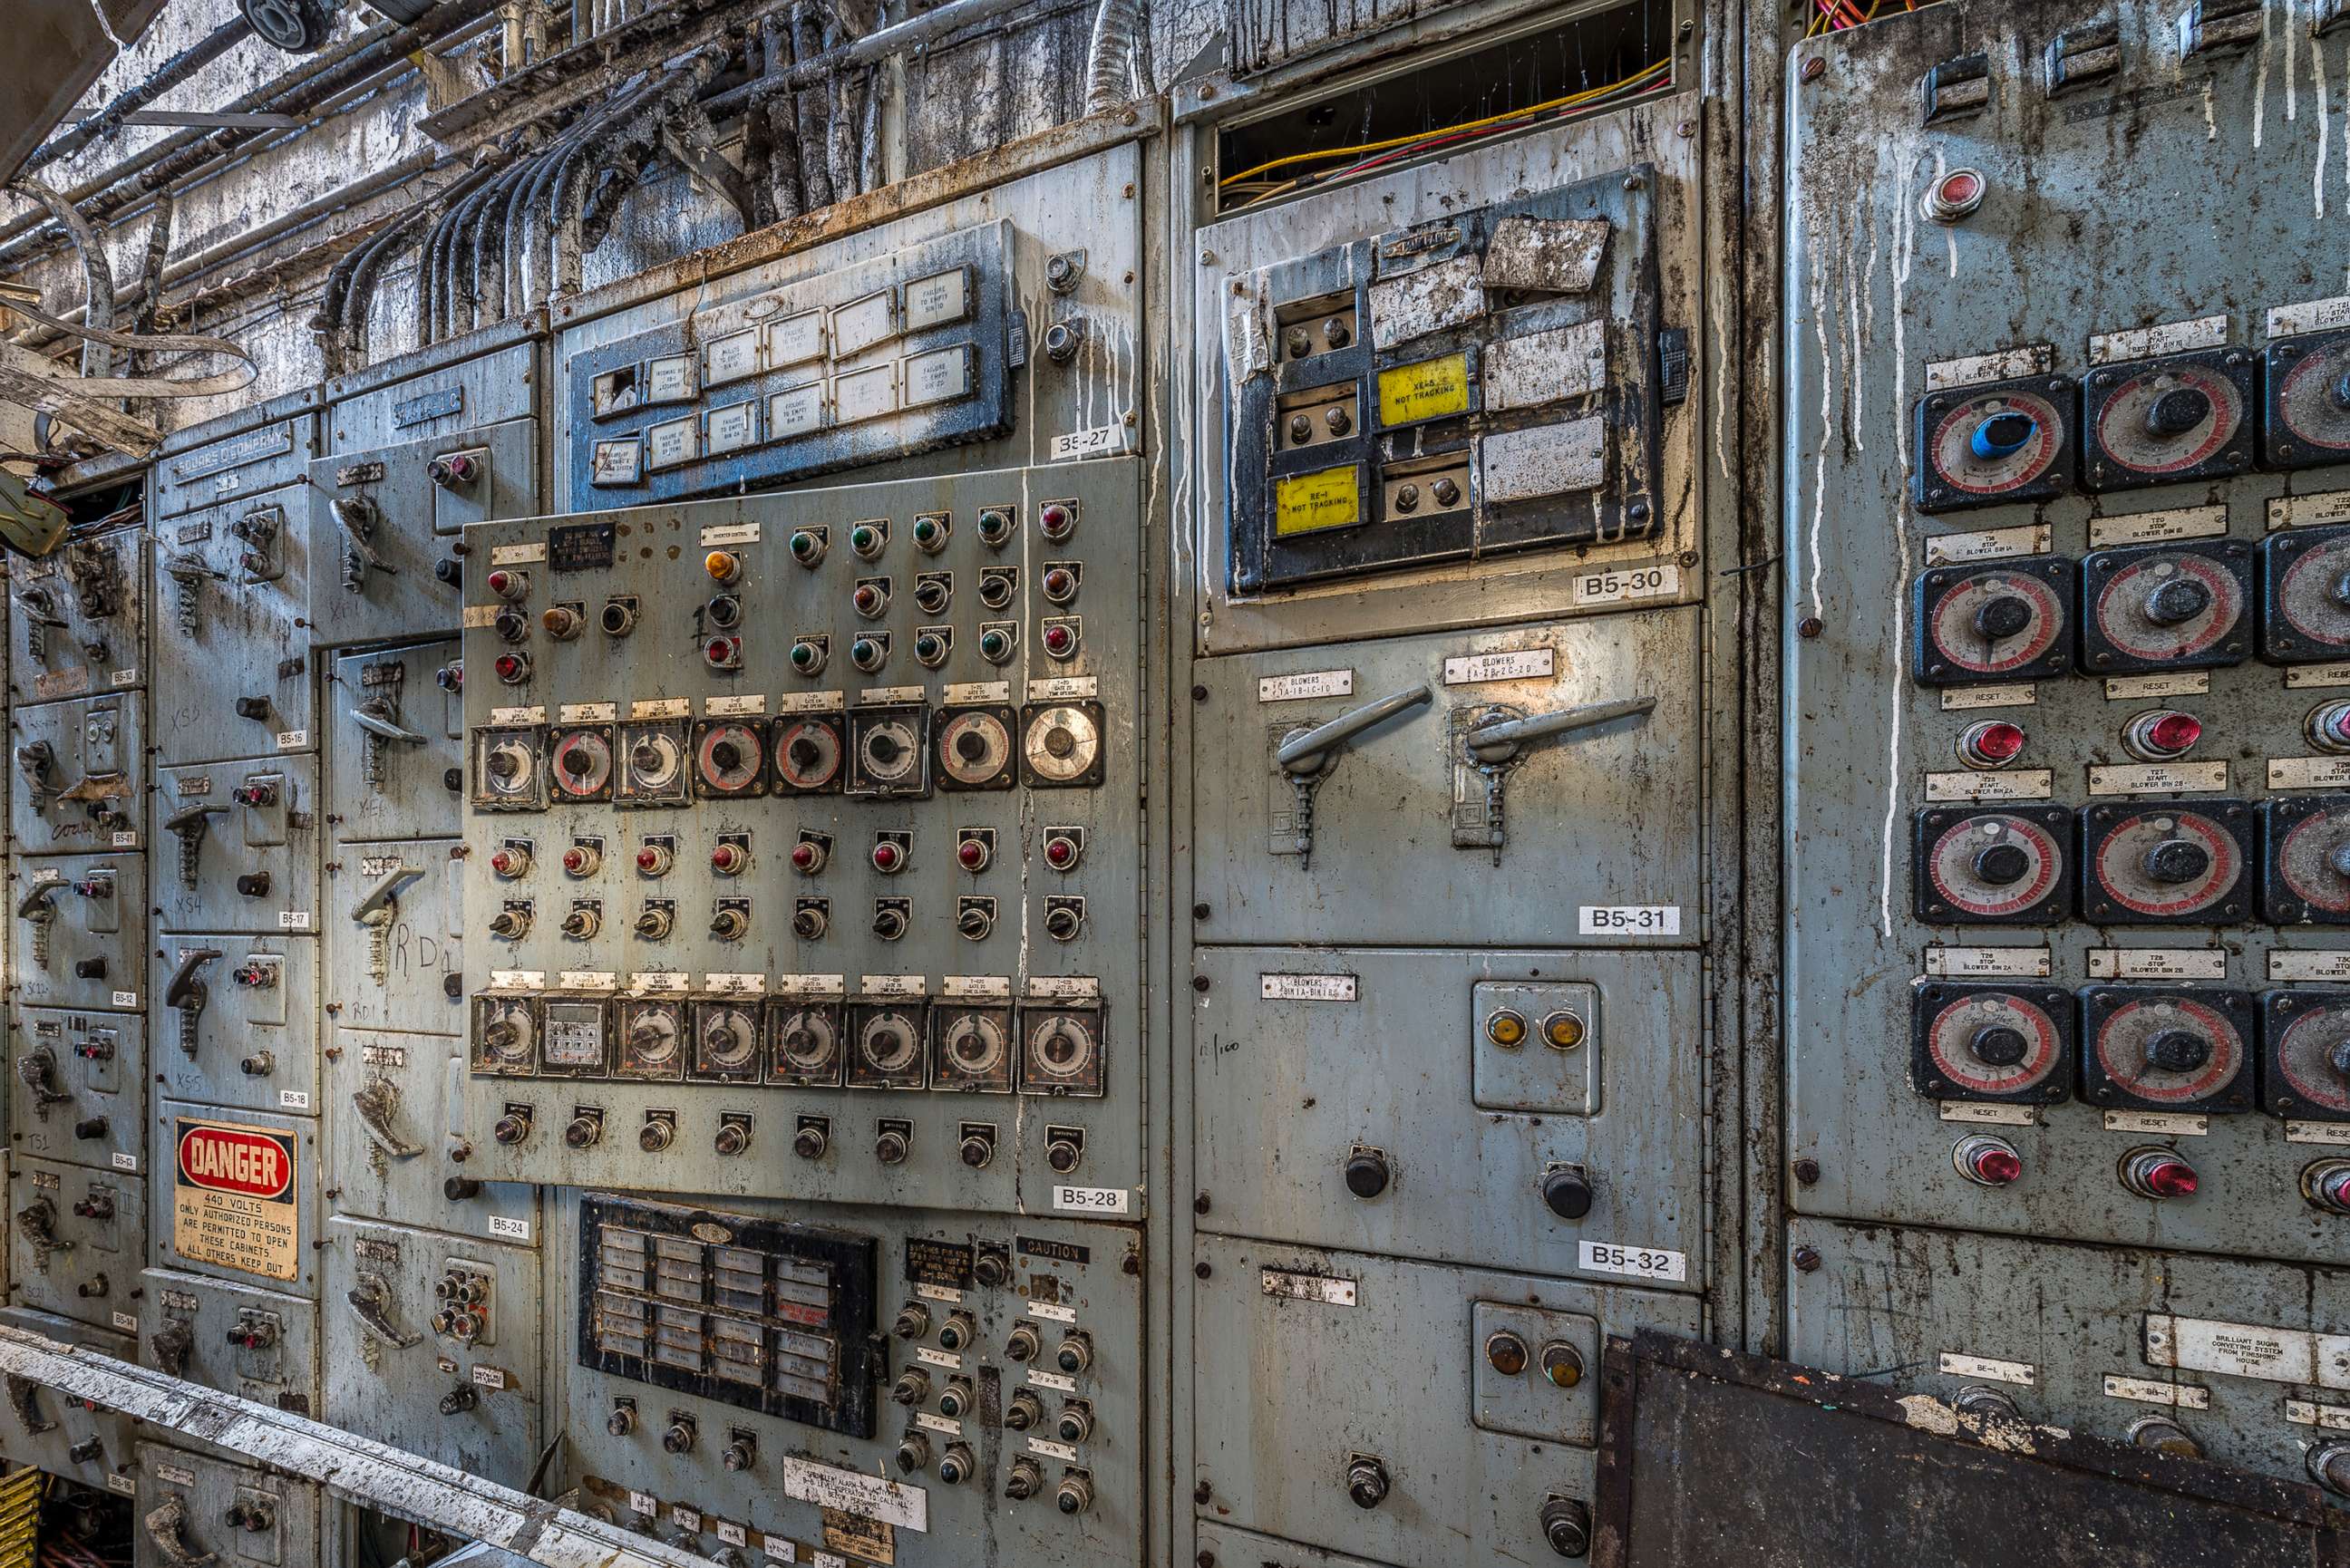 PHOTO: The bin distribution control panel and bin structure in the Domino Sugar Refinery in Williamsburg, N.Y.